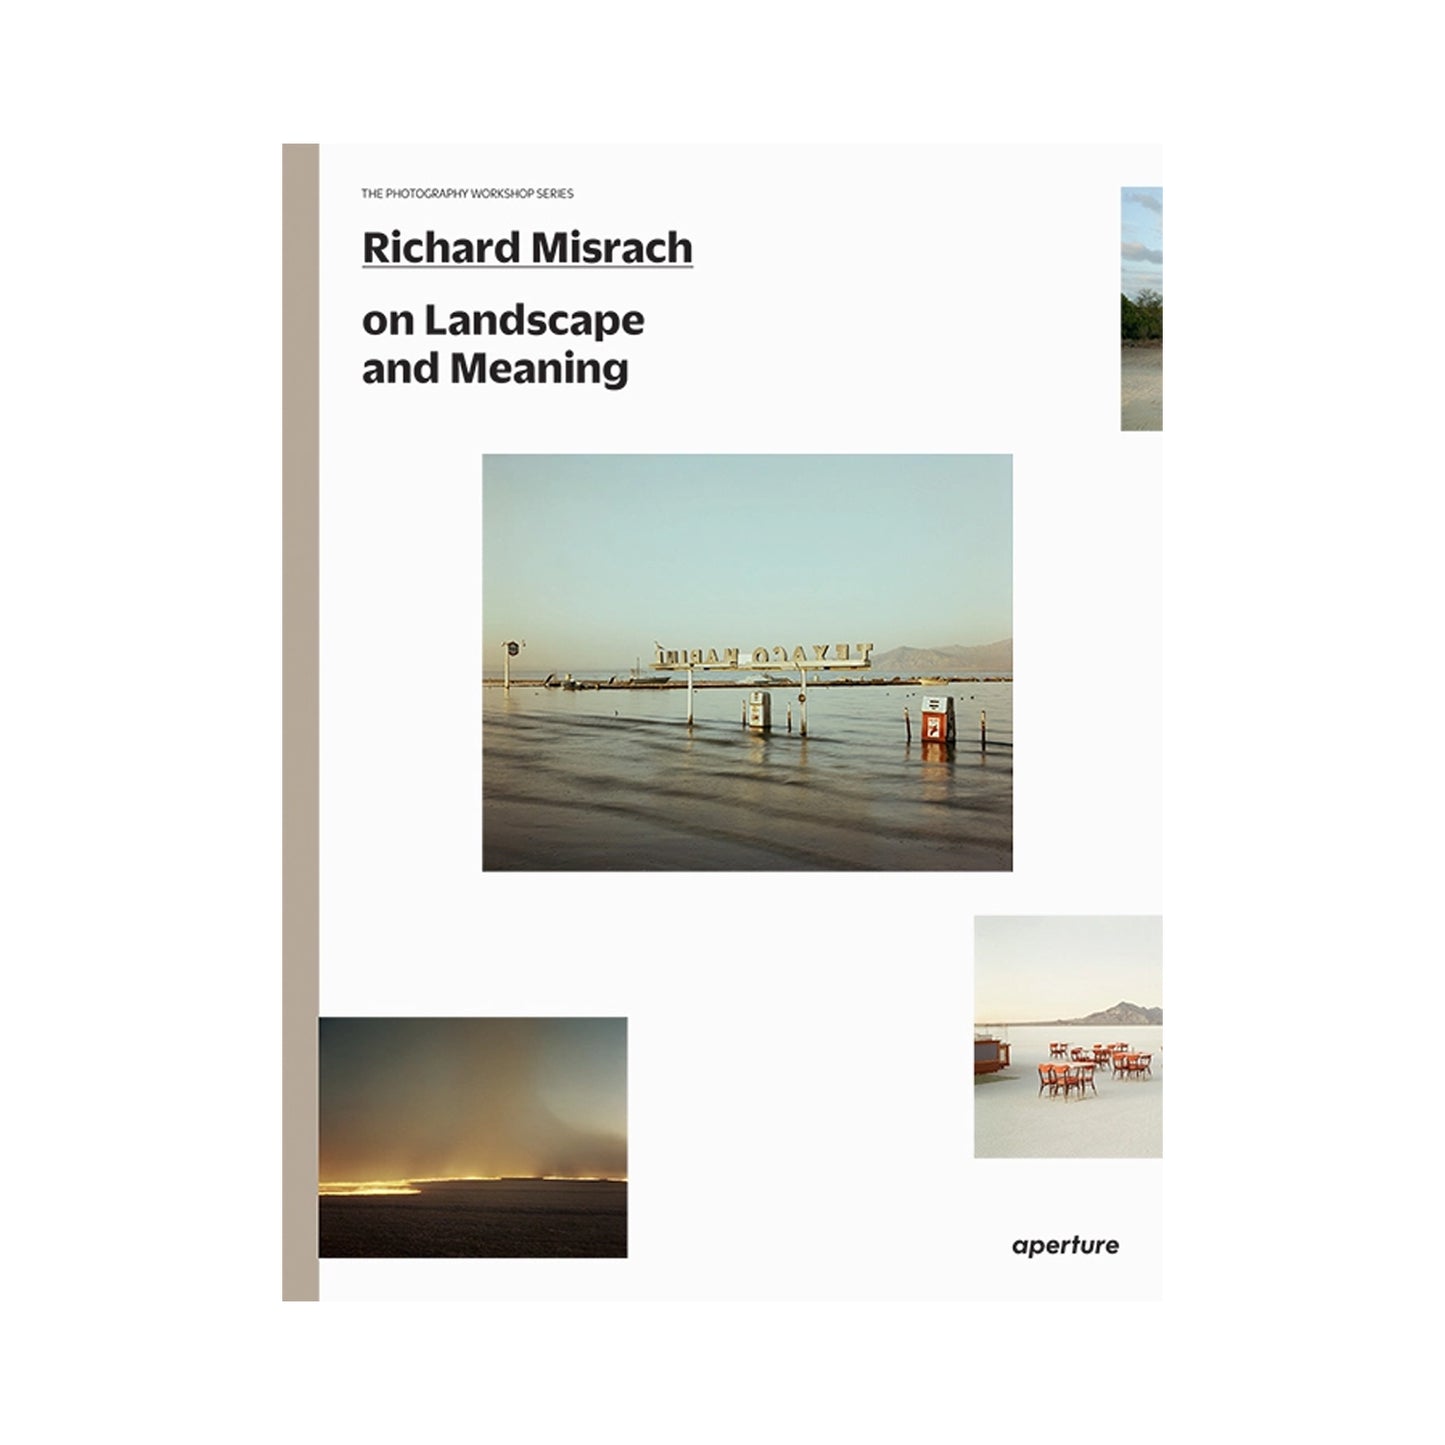 Richard Misrach on Landscape and Meaning. Aperture. Photo Museum Ireland.